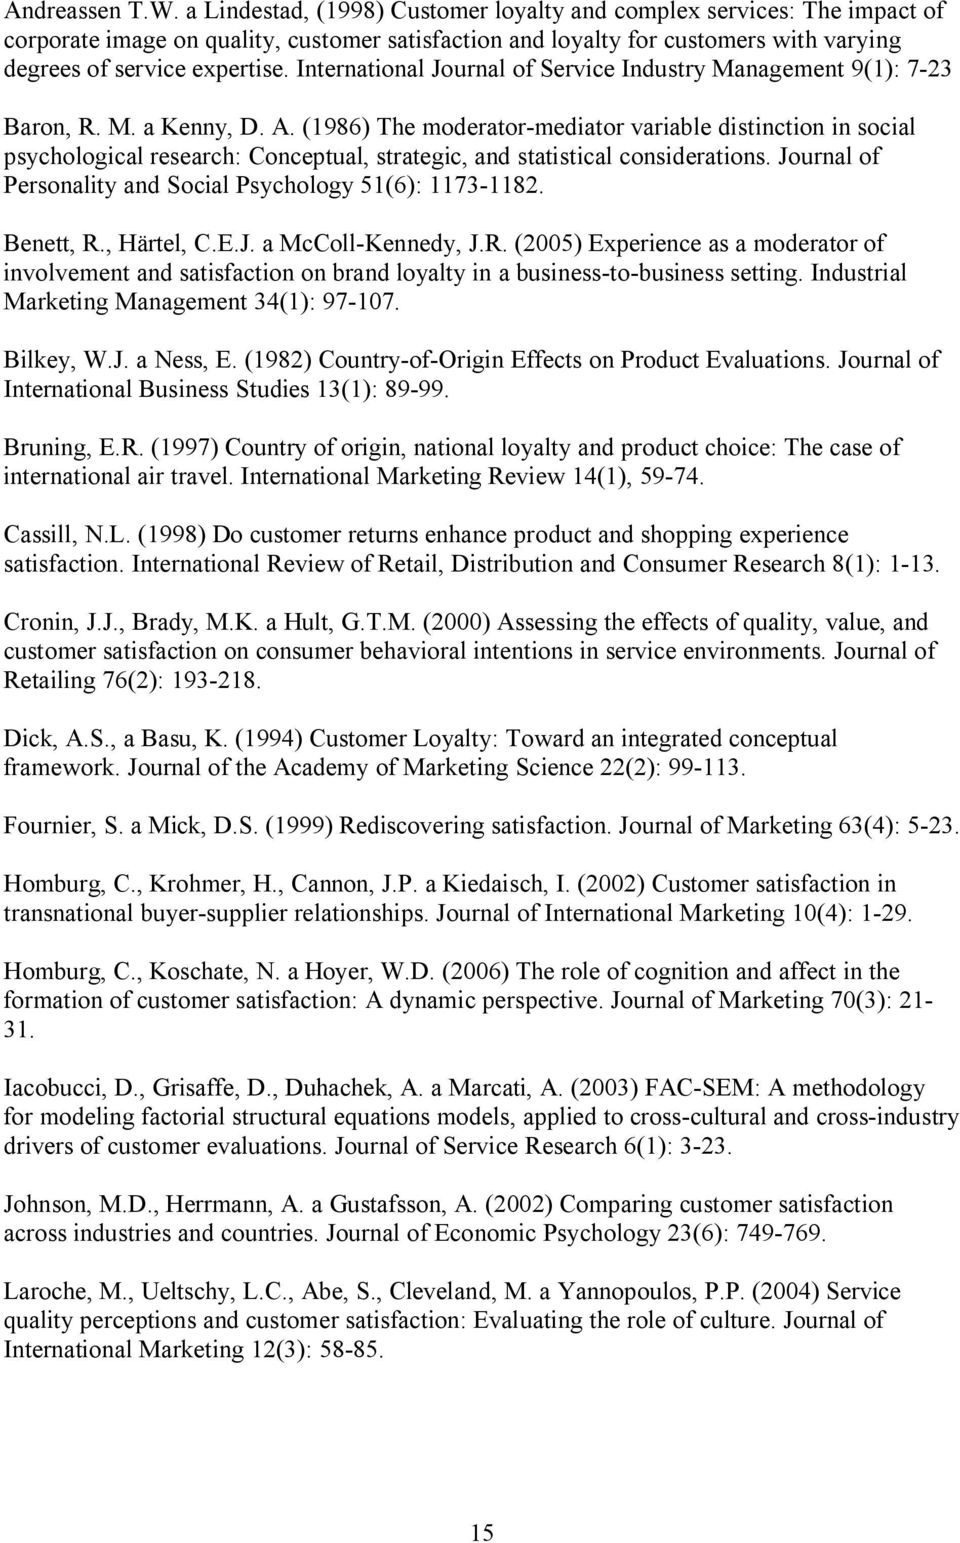 International Journal of Service Industry Management 9(1): 7-23 Baron, R. M. a Kenny, D. A.